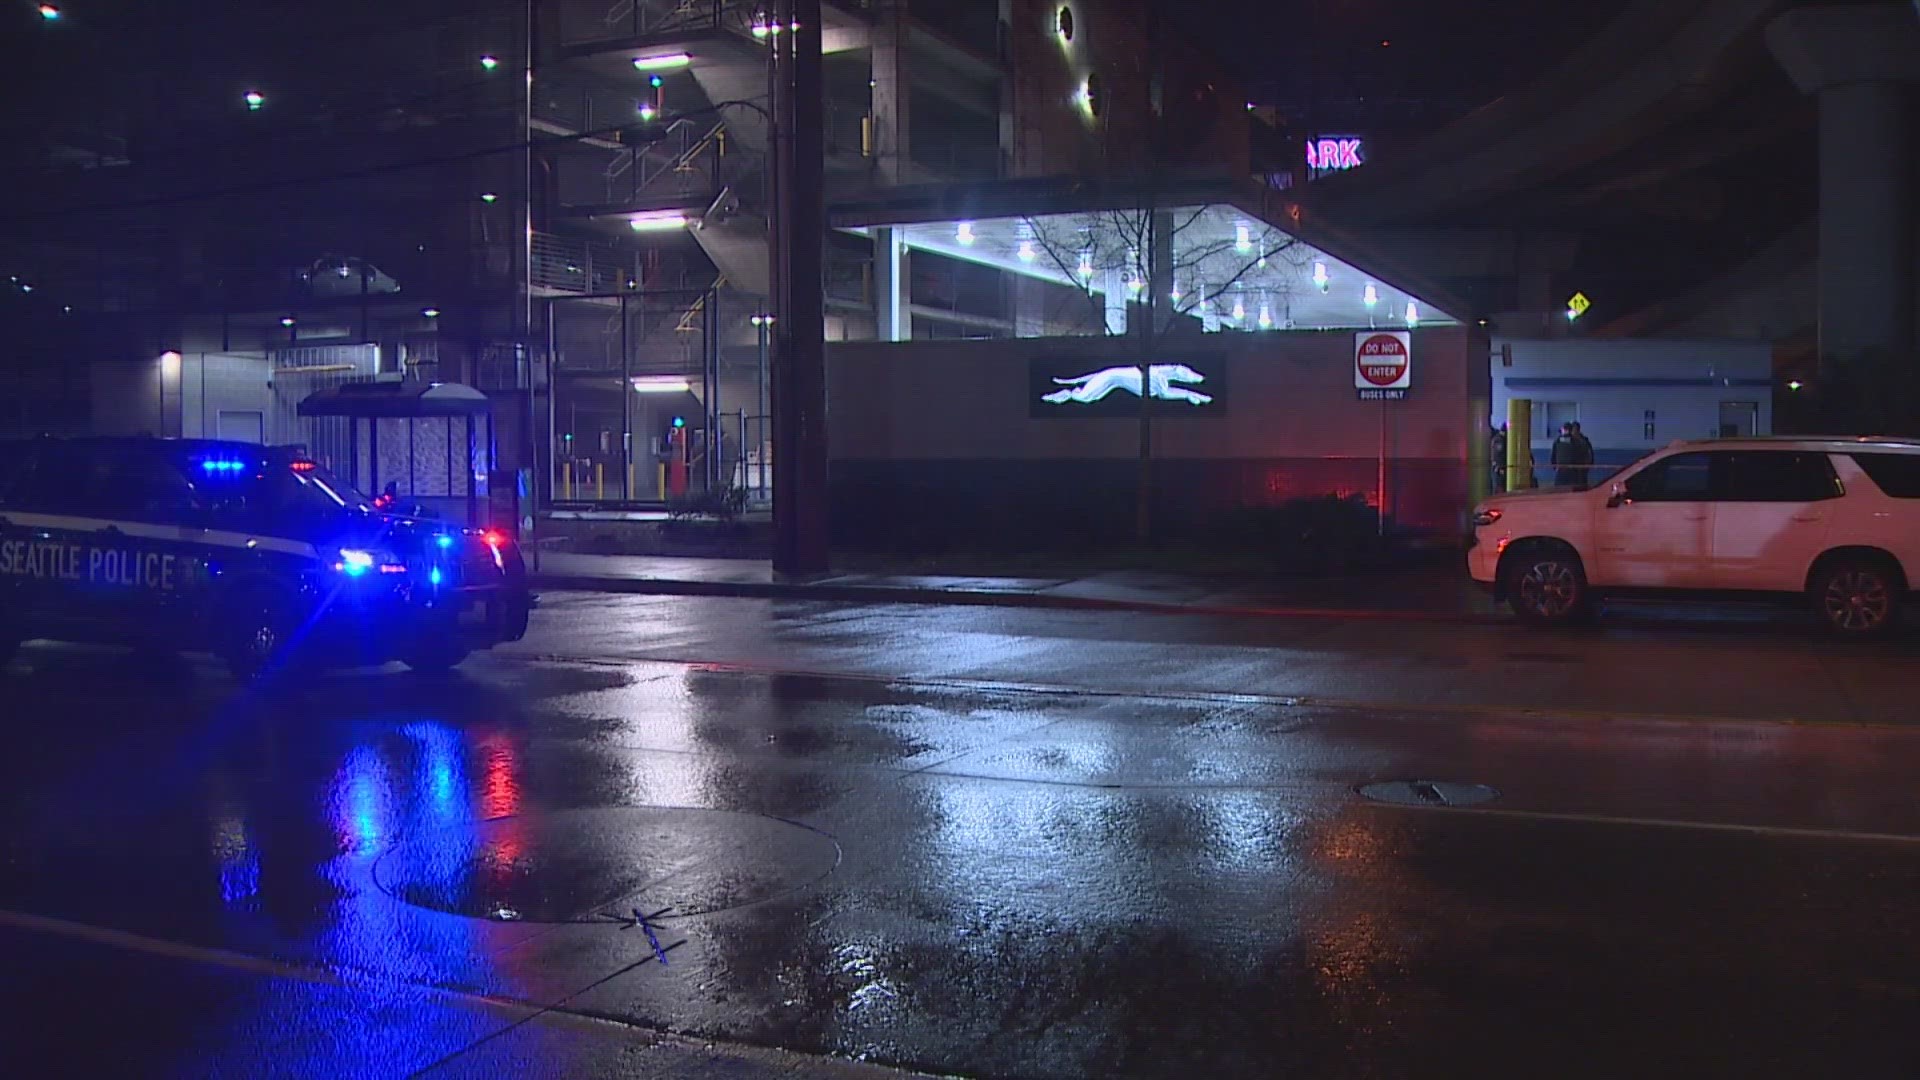 A 23-year-old woman is in critical condition after a shooting at the Greyhound bus station on Royal Brougham Way in Seattle